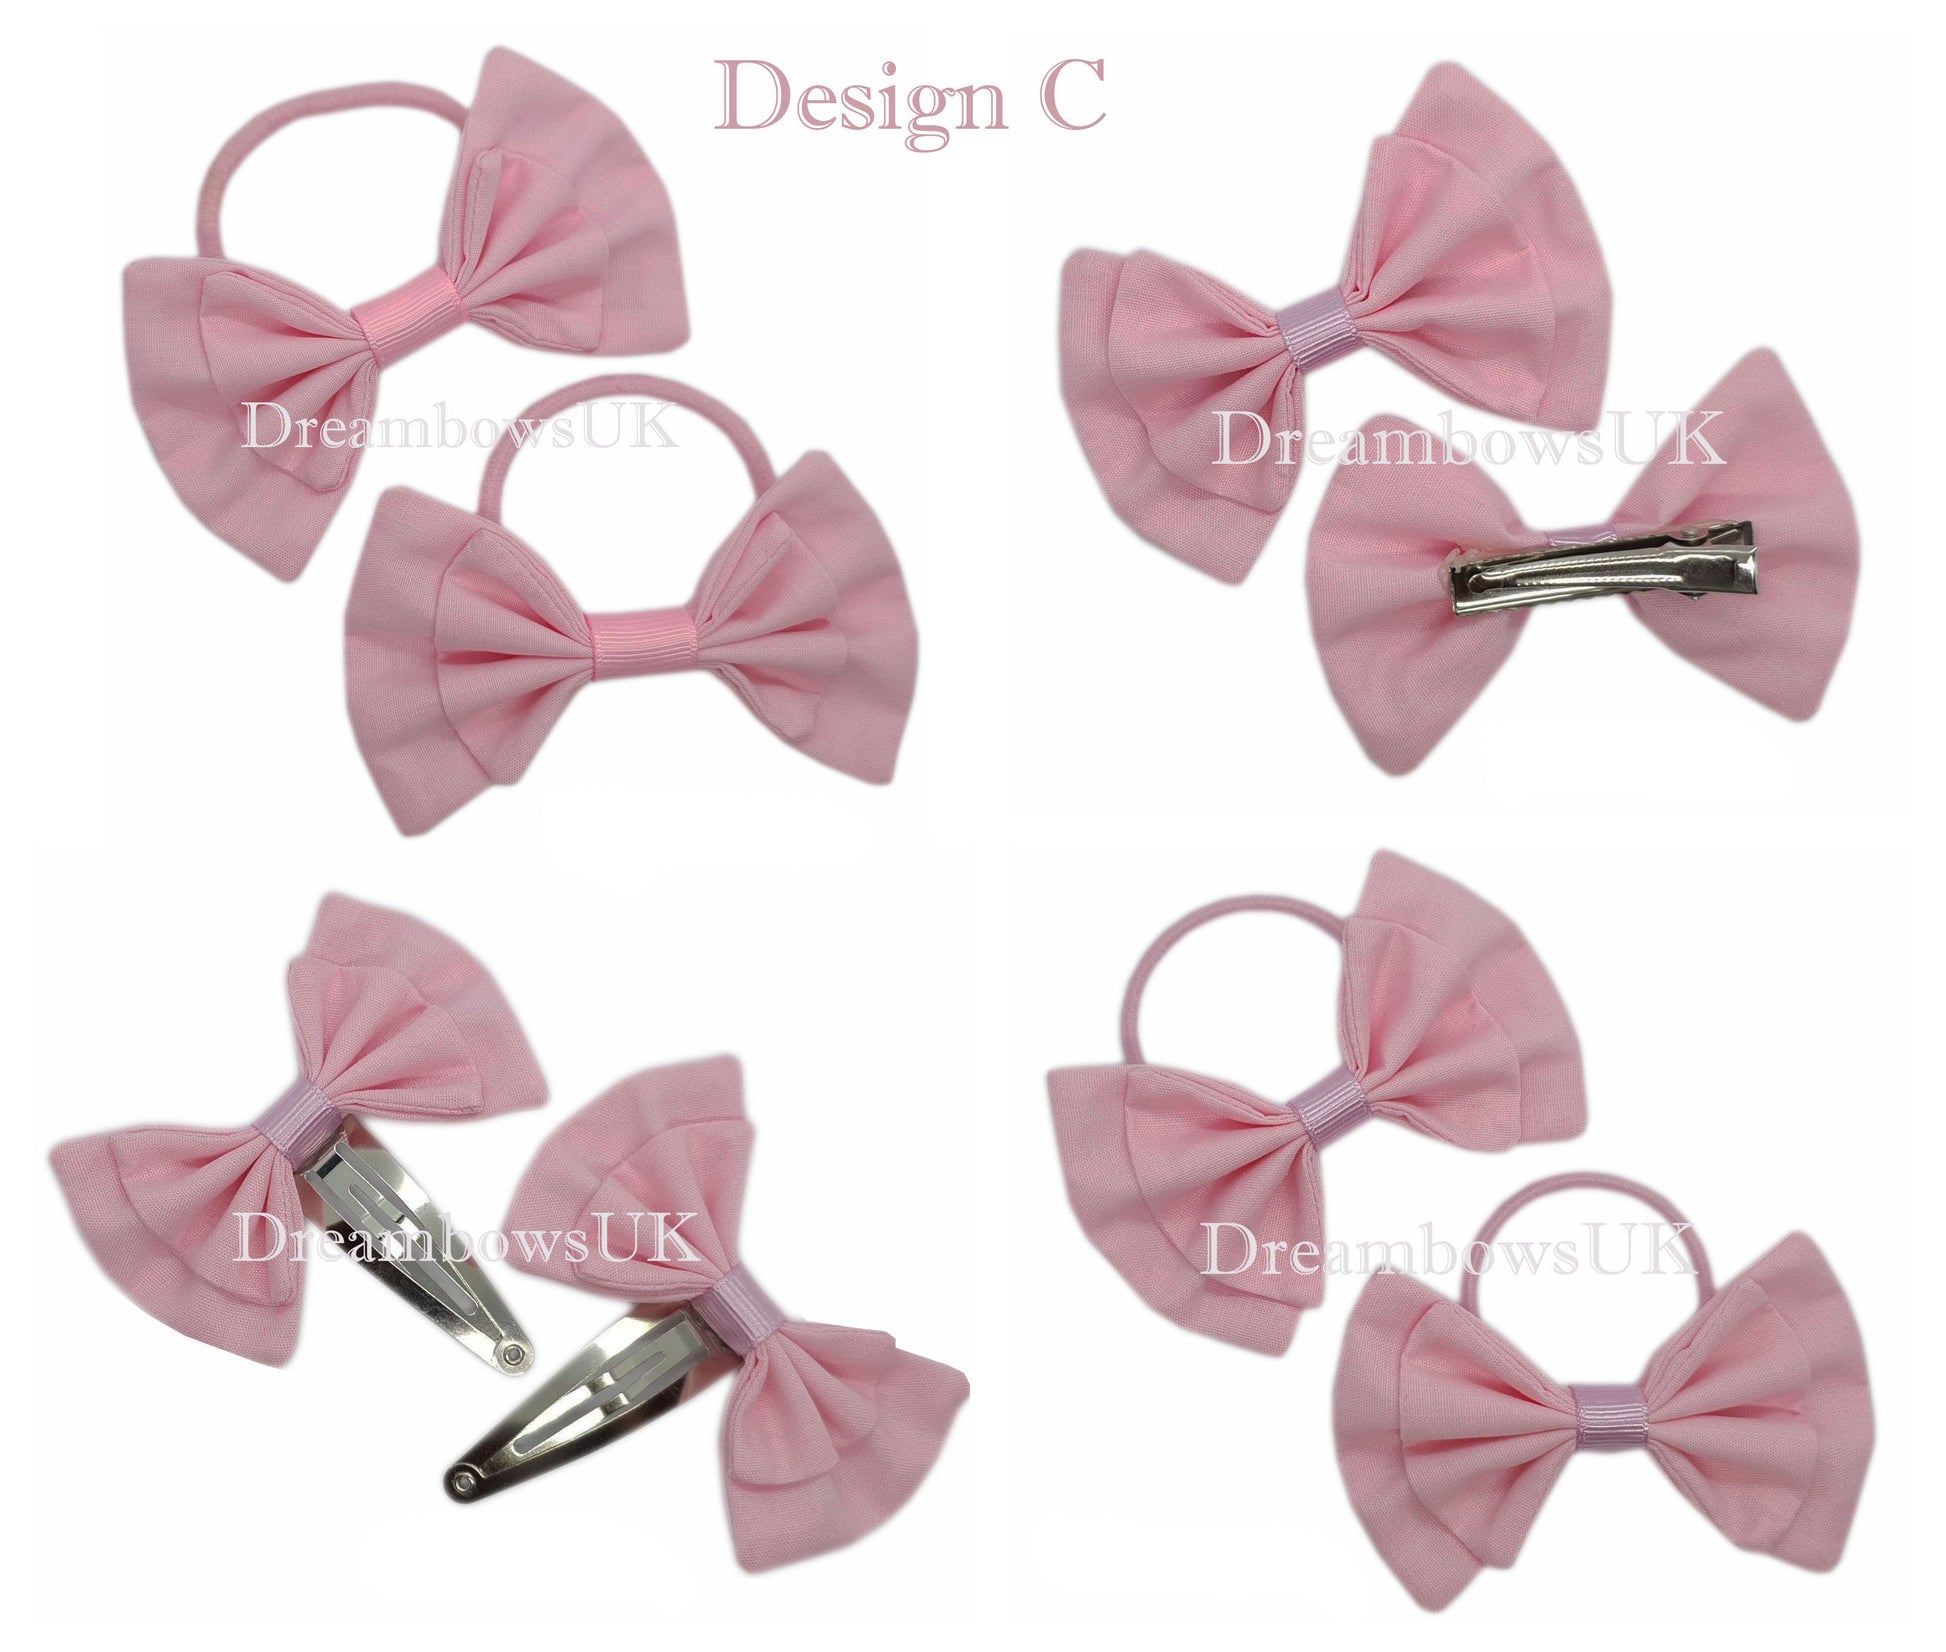 Custom made baby pink fabric hair bows on bobbles and hair clips